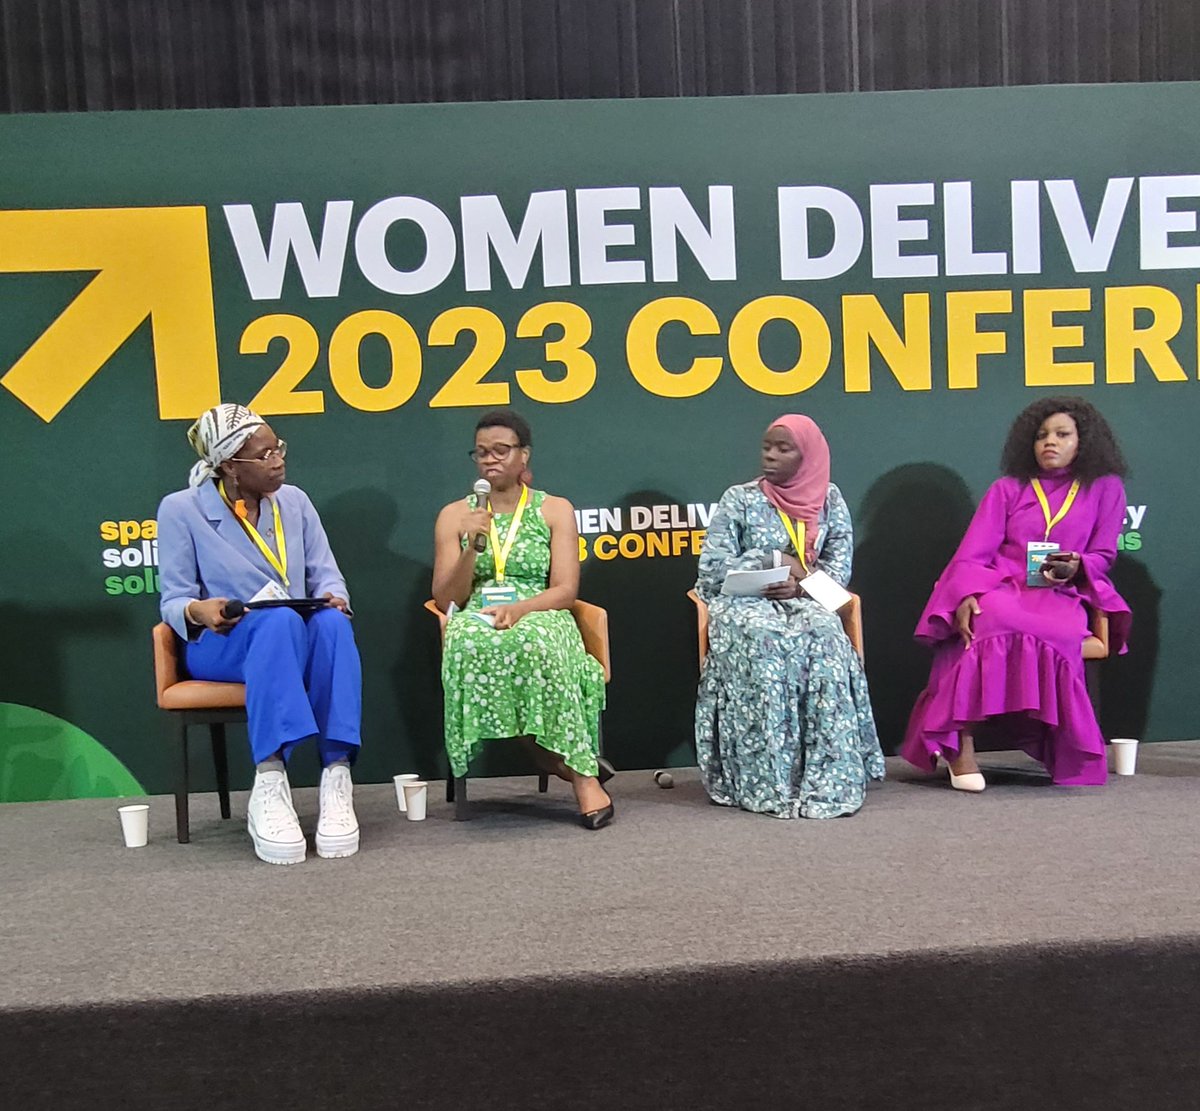 SRGBV is everybody's problem, so everybody must be involved in the solution - @VicEgbe and @ashleeburnett discussing the new youth and survivo-led  report on #srgbv from @GPtoEndViolence during #WD2023